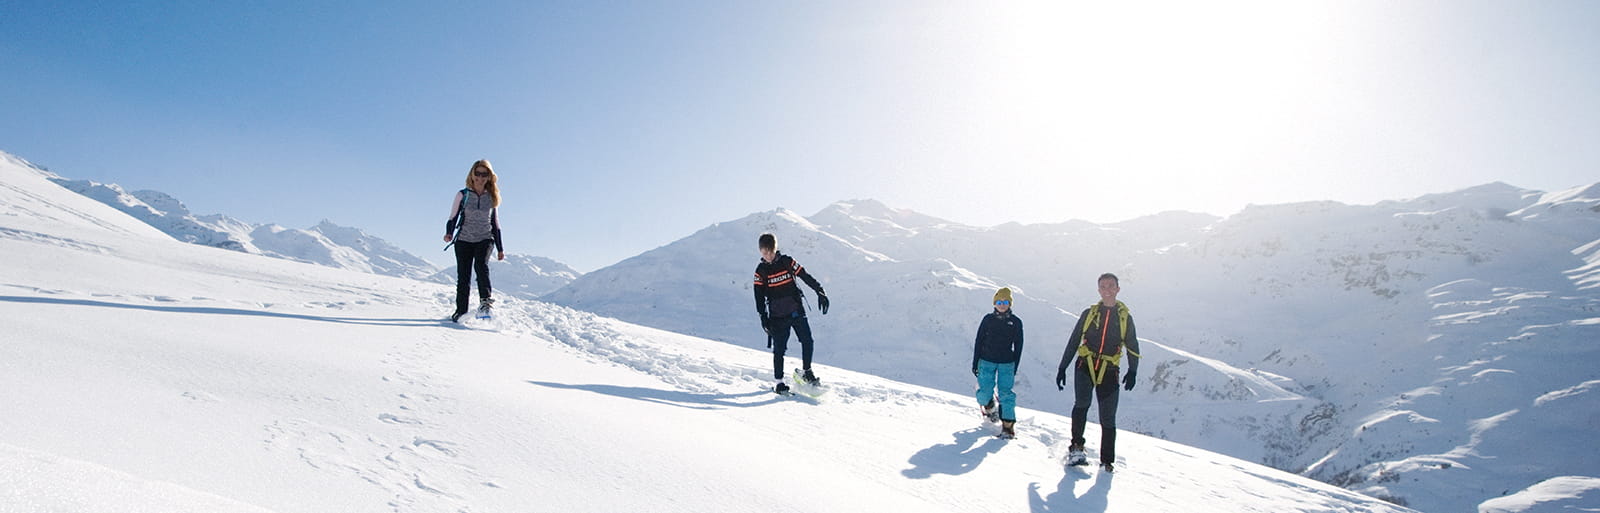 How to have a good holiday in the mountains without skiing?